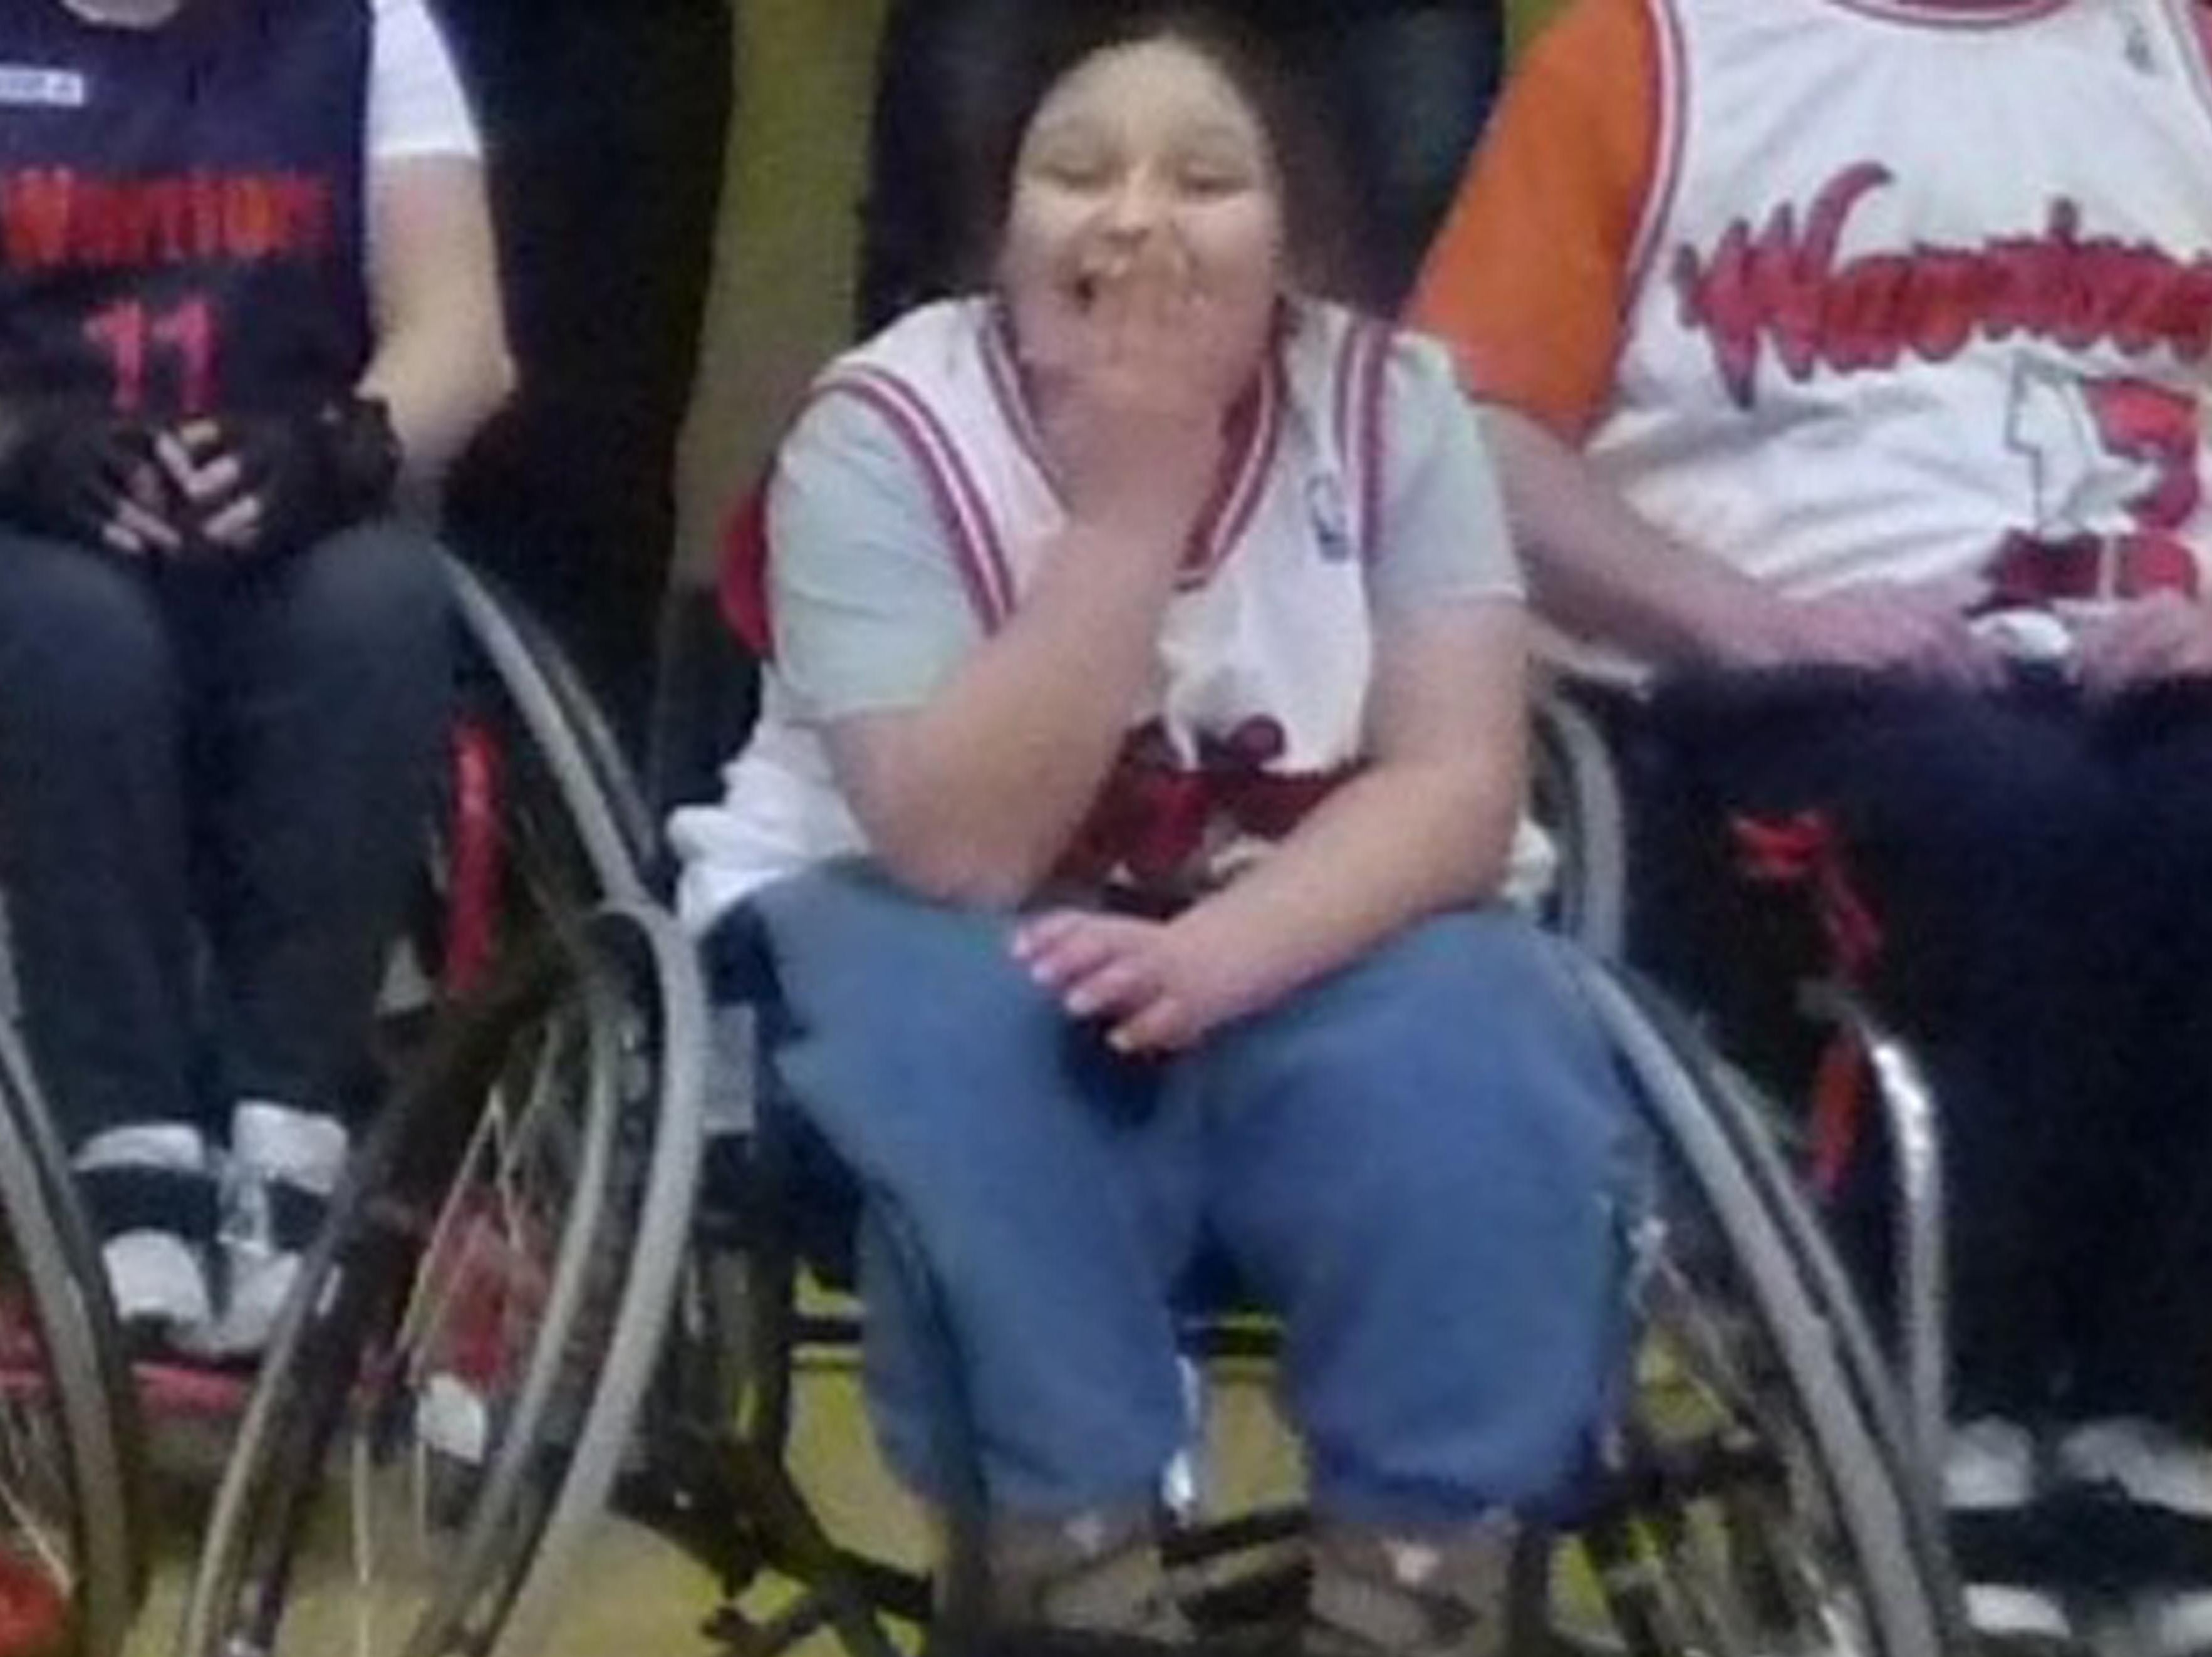 Kaylea Titford, 16, had spina bifida and hydrocephalus restricting her to a wheelchair since a child